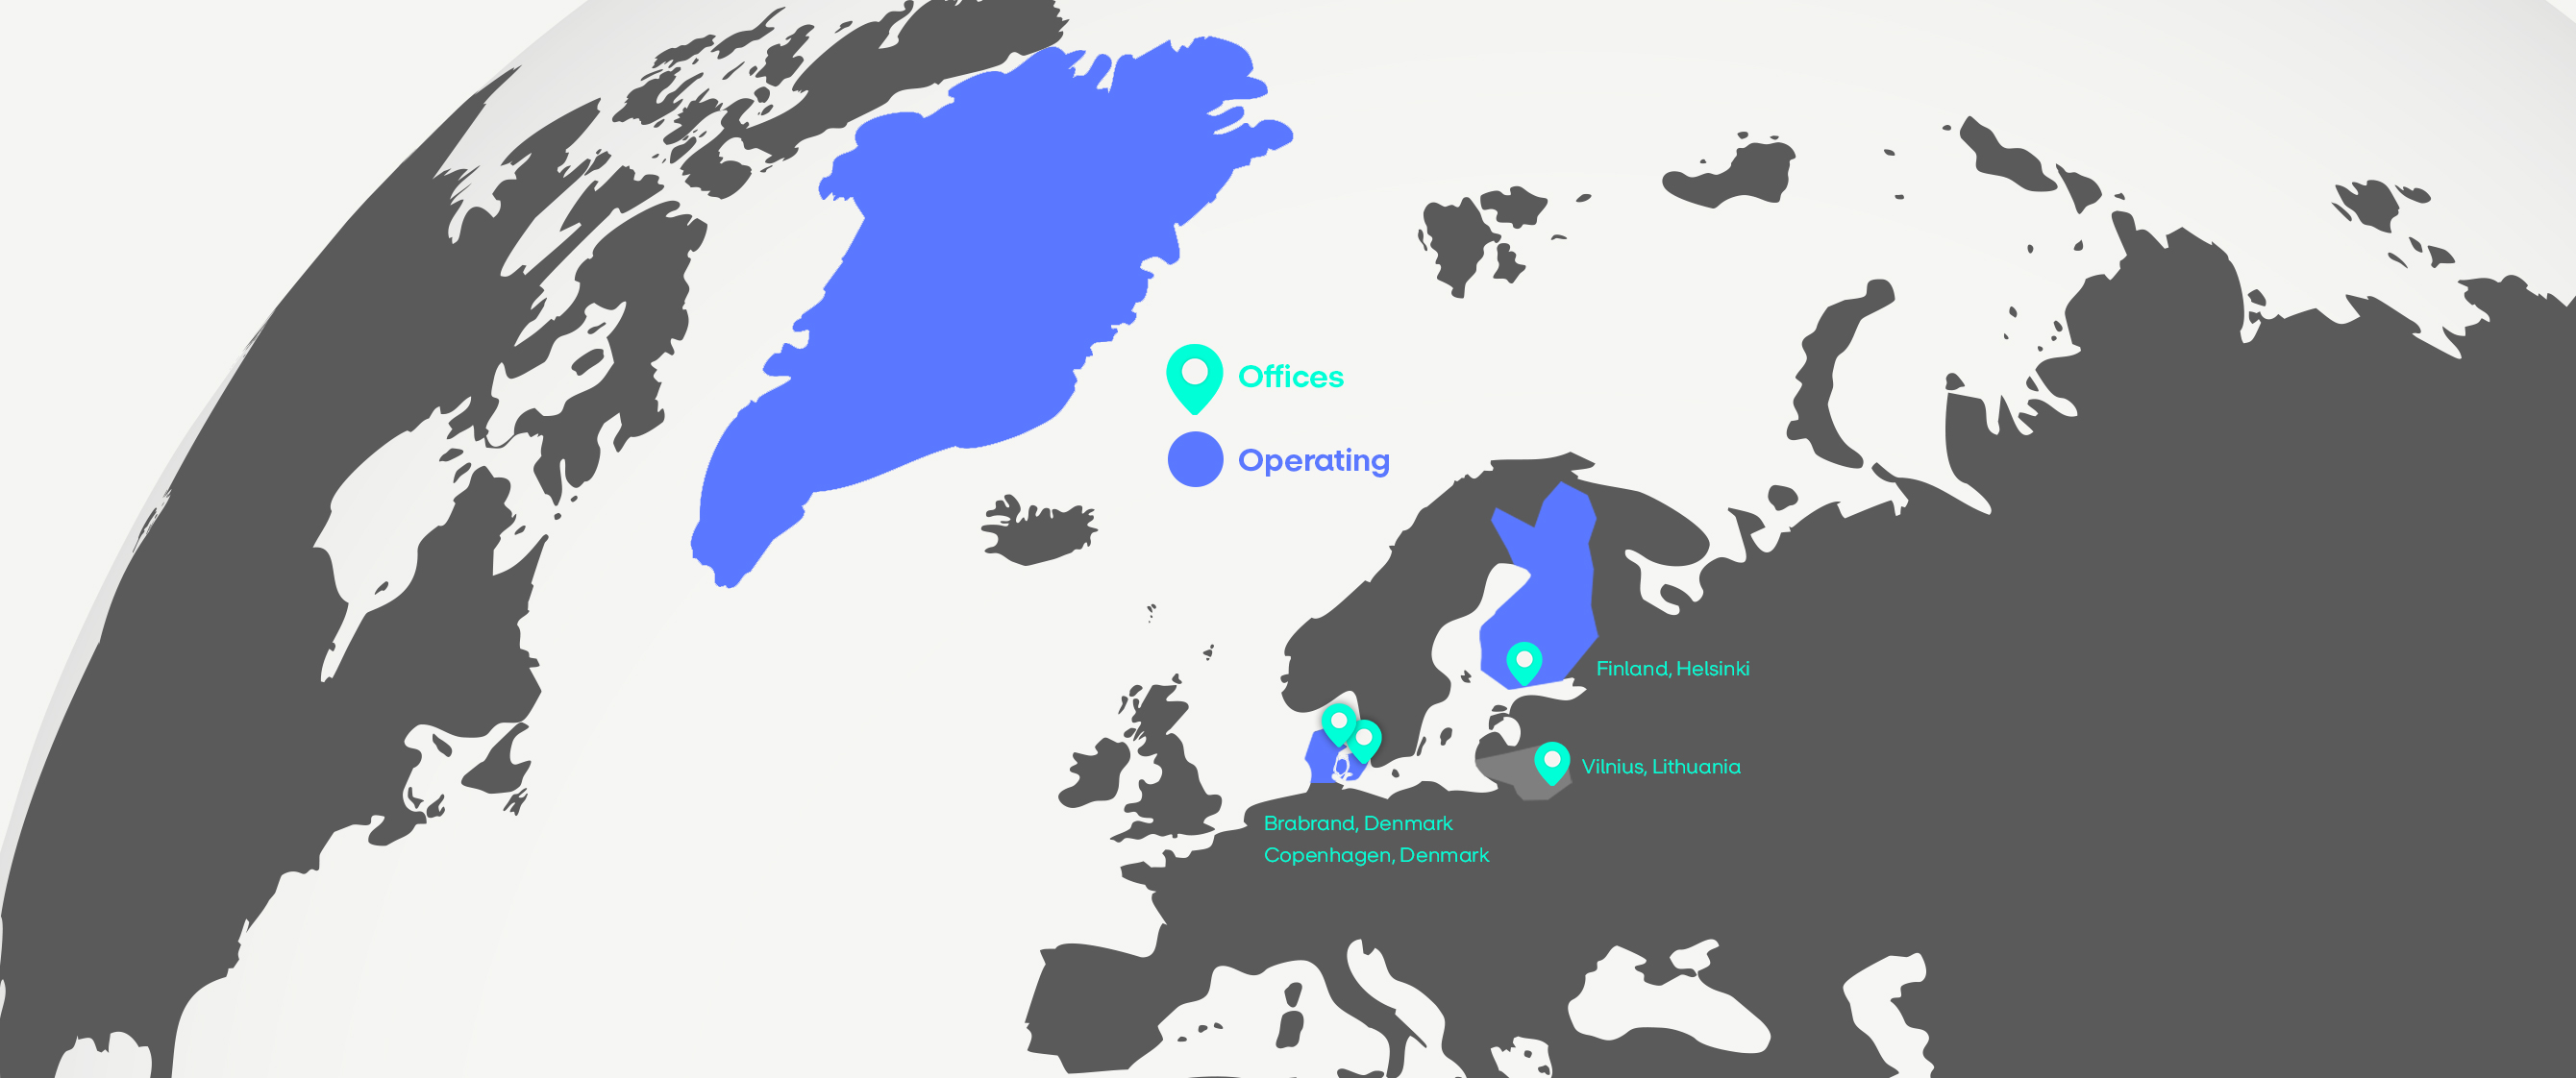 MobilePay A/S - your Nordic Mobile Payment Solution operating in Denmark, Finland and Greenland